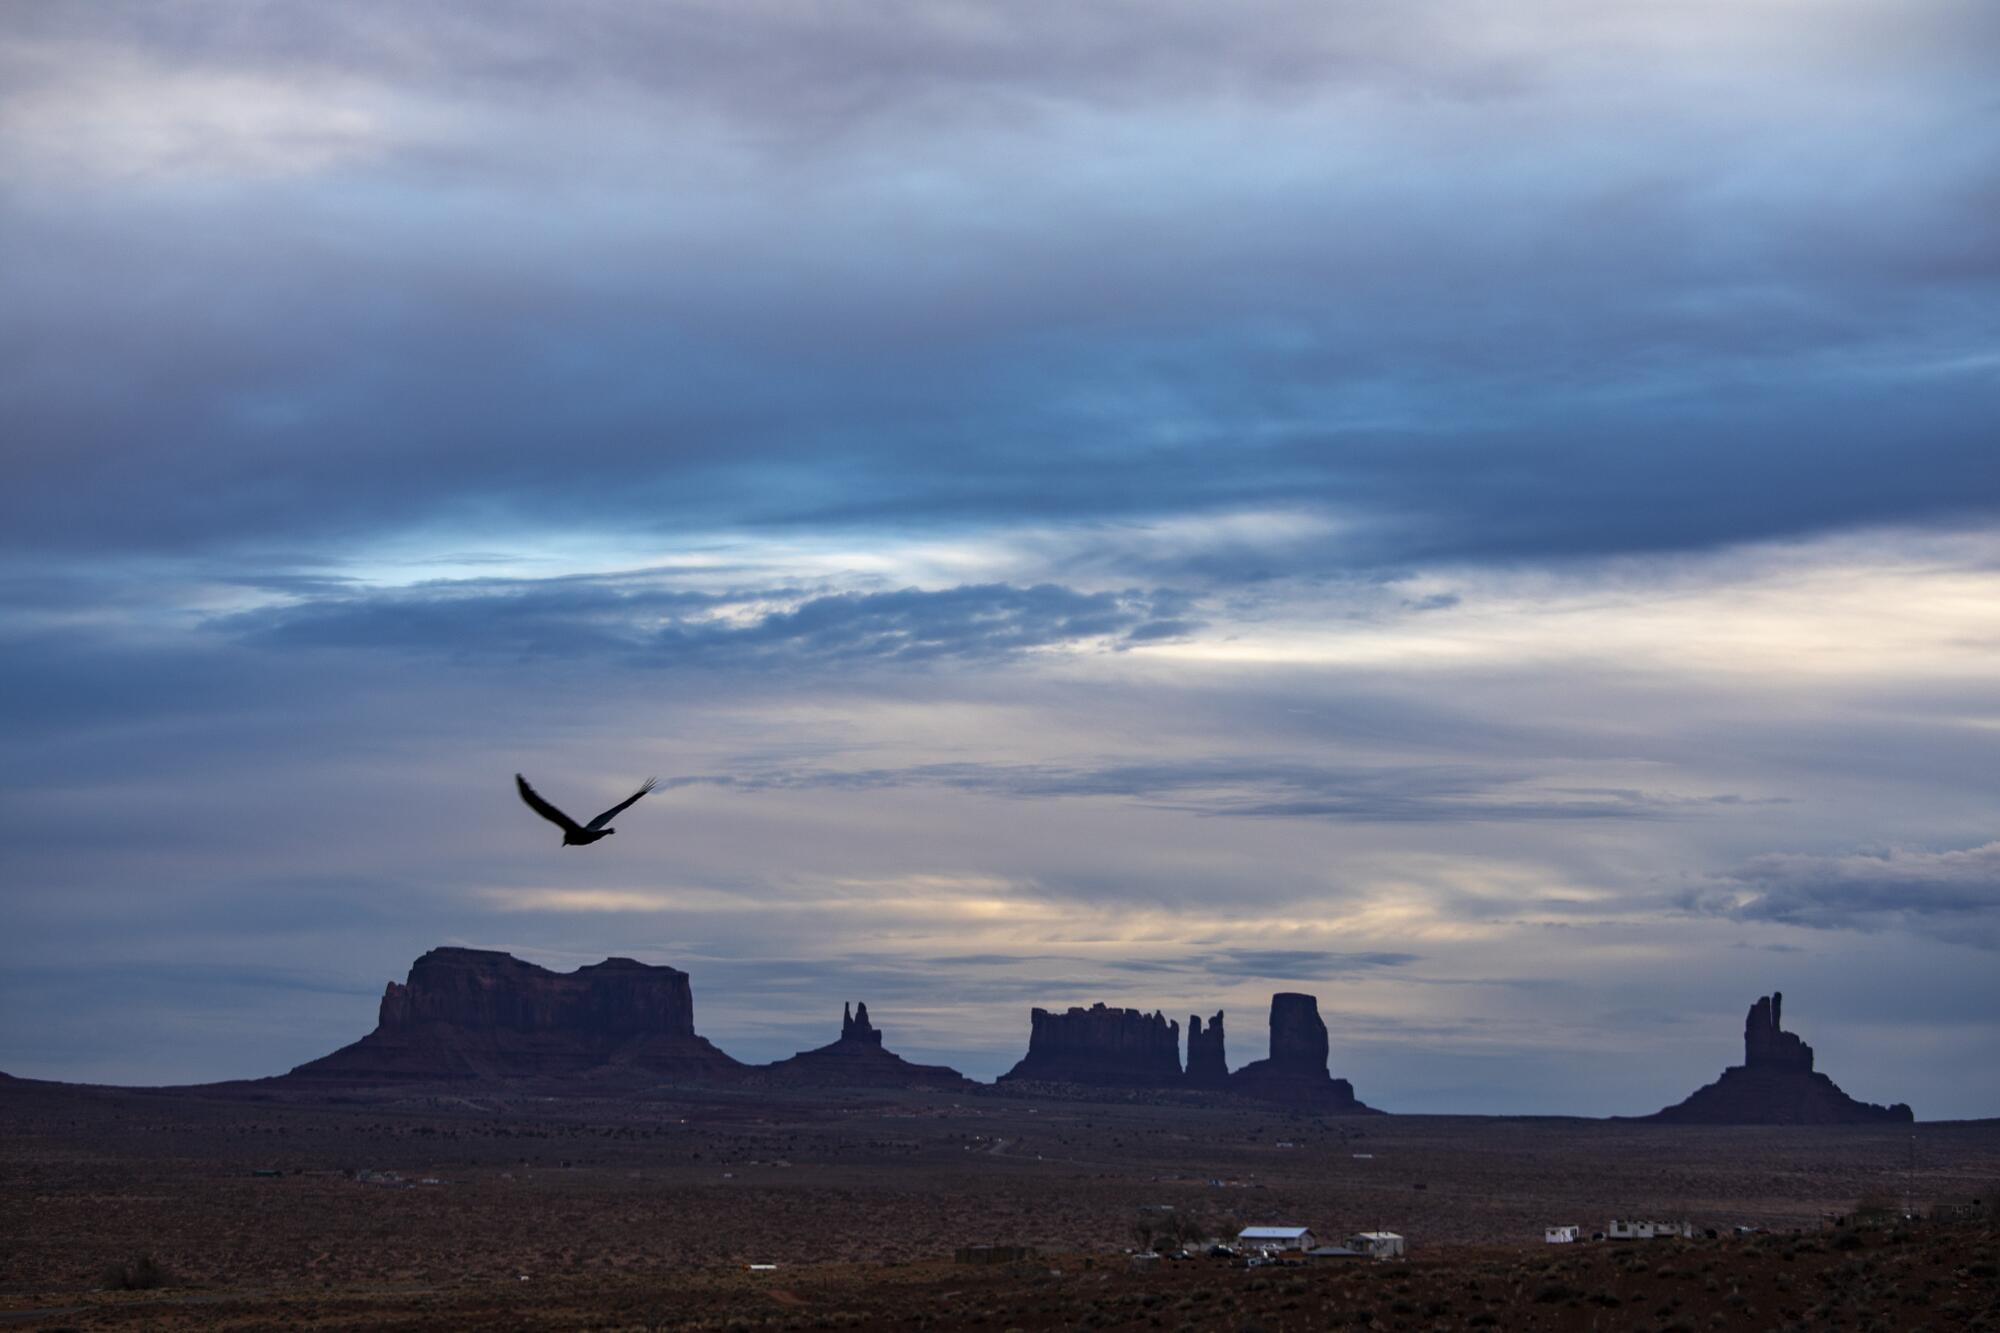 A bird takes flight over Monument Valley in the Navajo Nation.